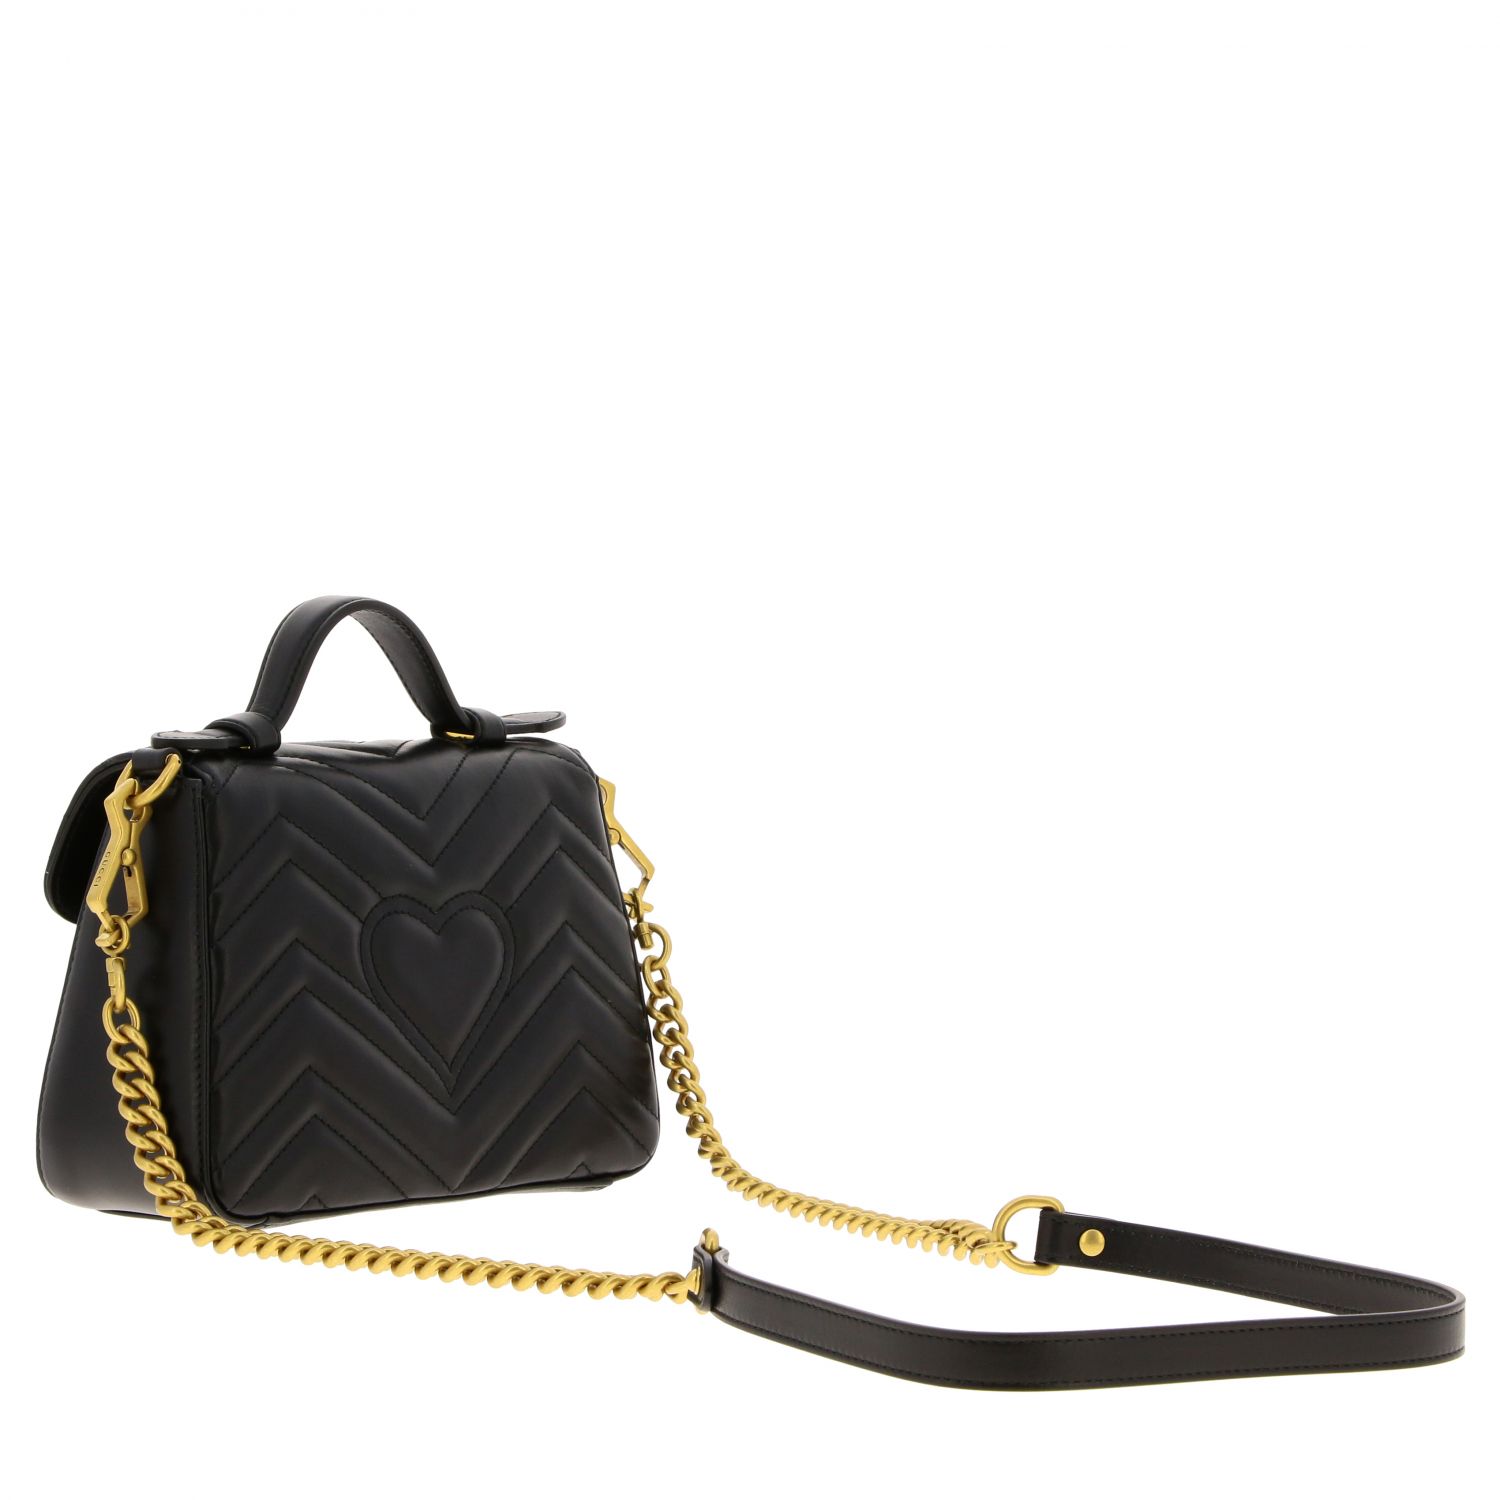 Sold at Auction: GUCCI - GG Marmont Chevron Leather Bucket Bag Mini Black /  Gold Crossbody Bag